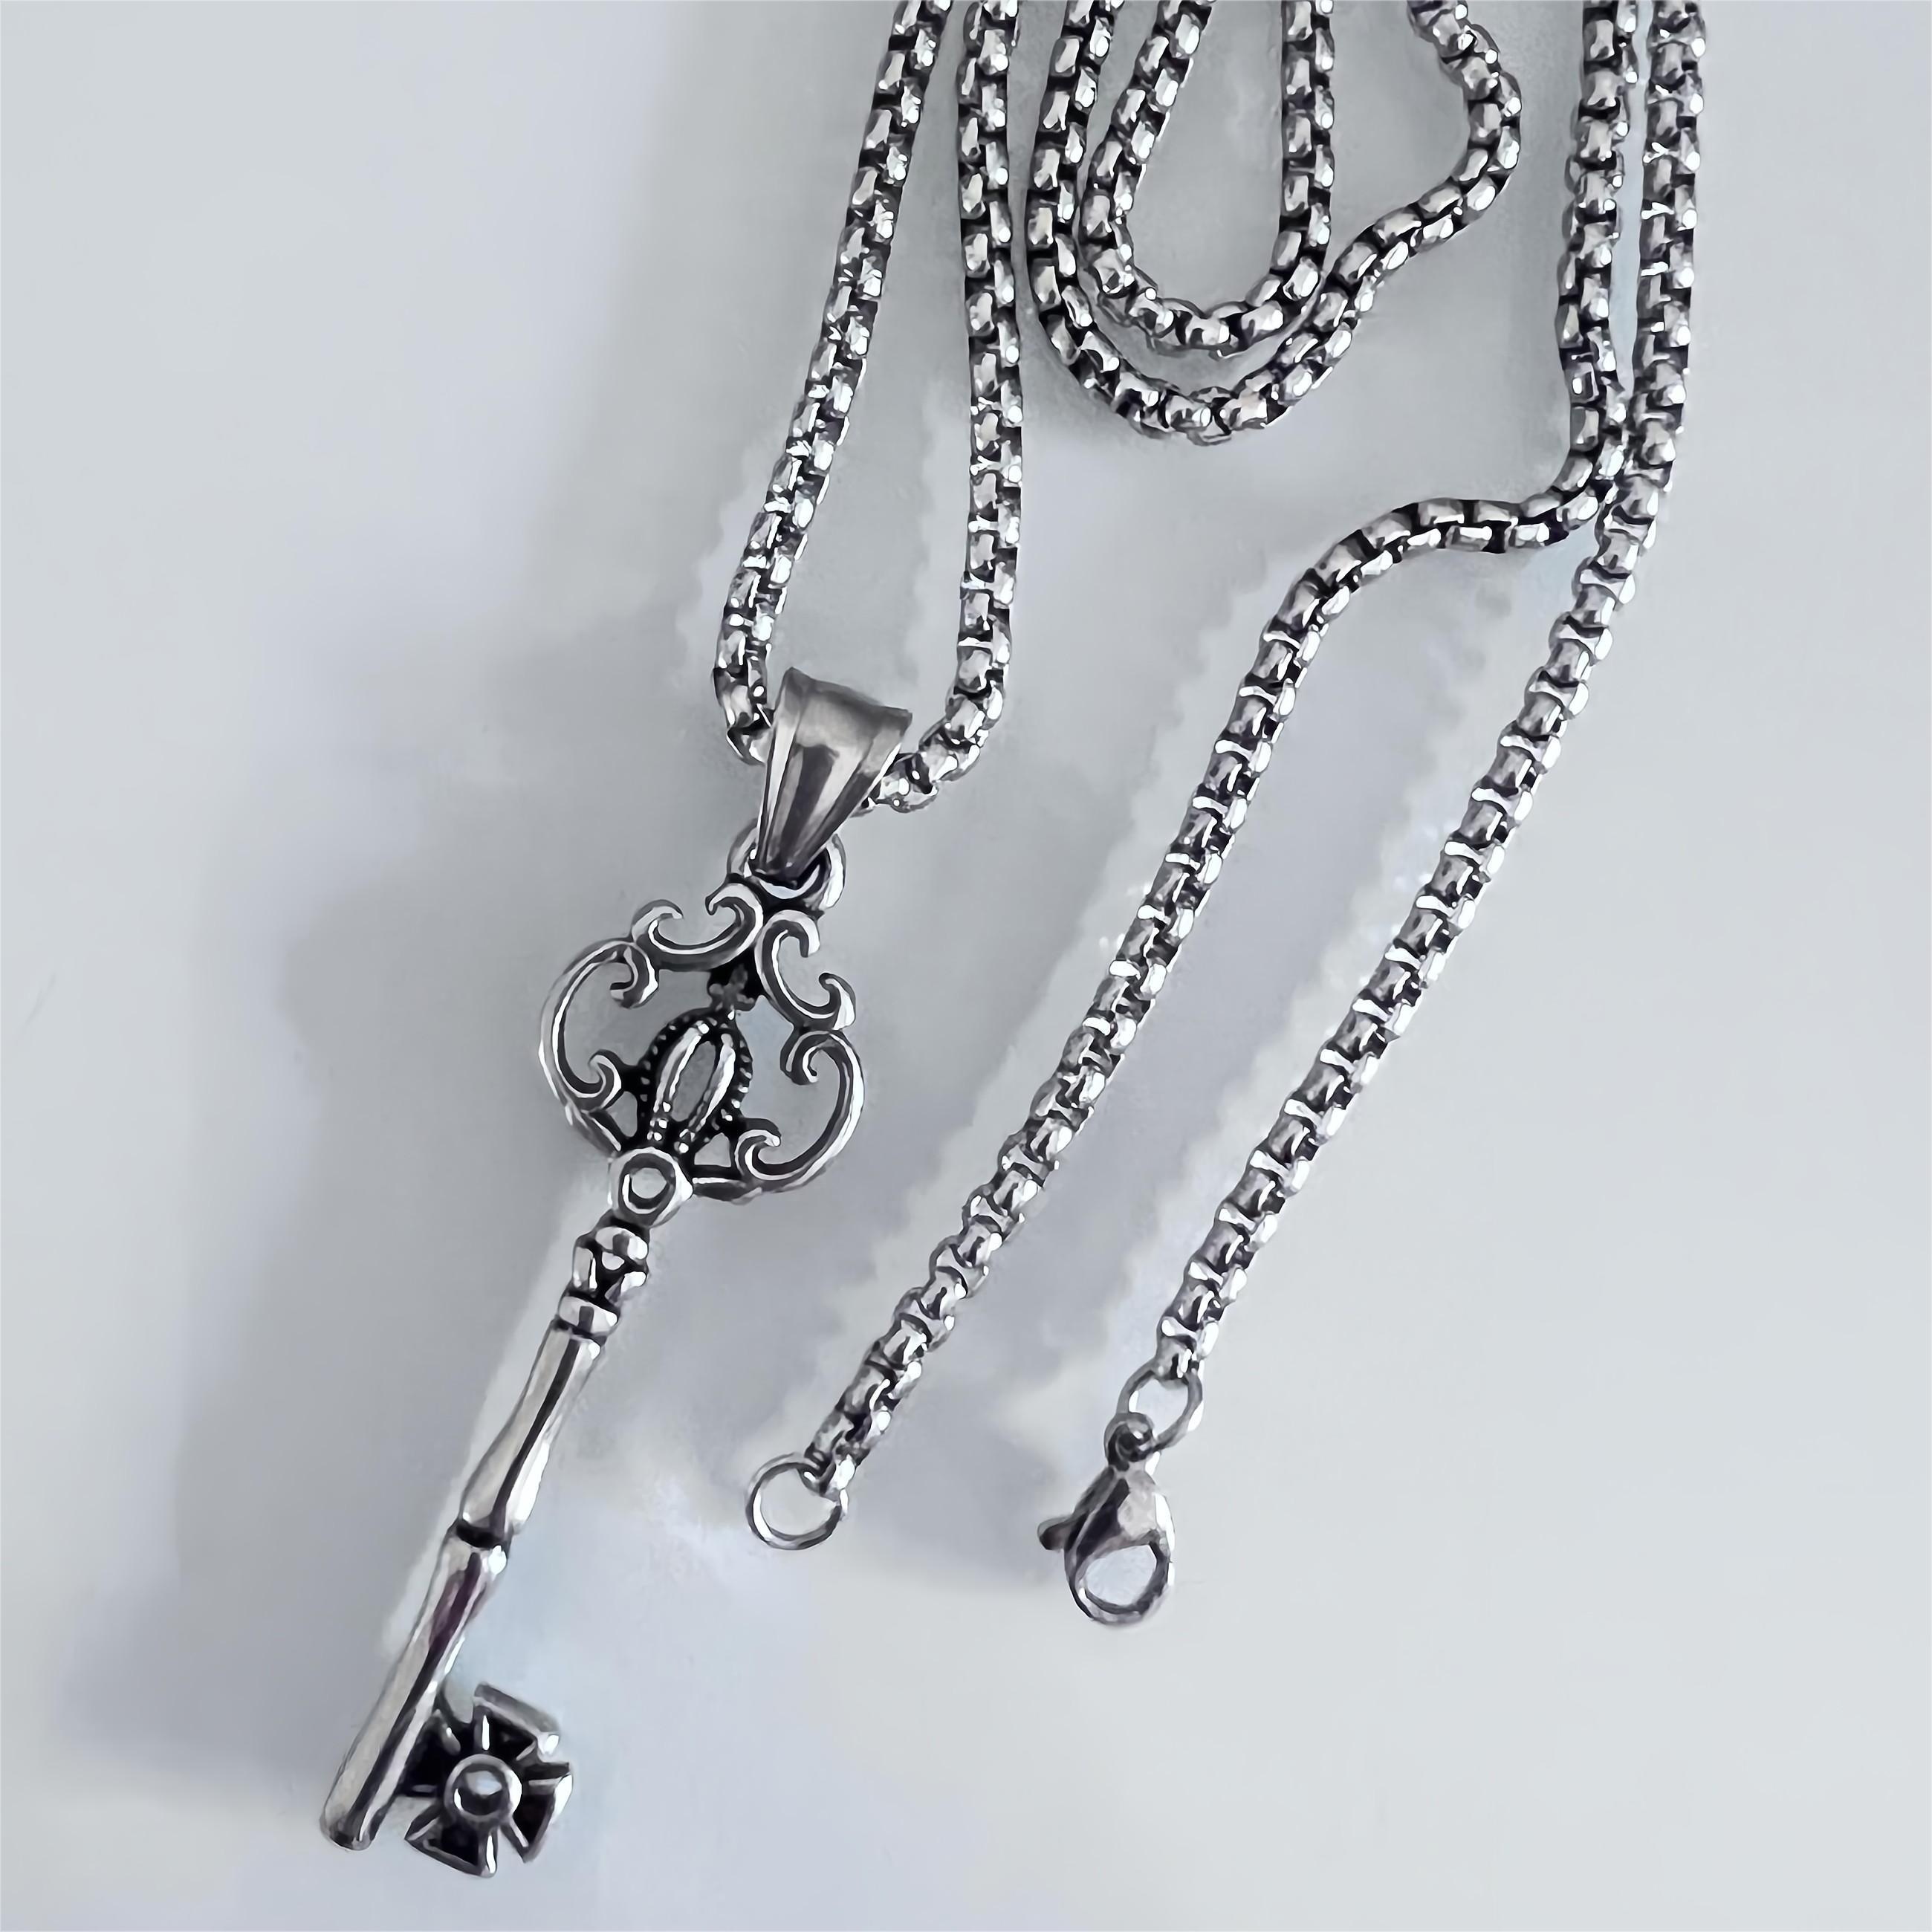 Men's Stainless Steel Stainless Steel Crown Key Pendant Necklace 